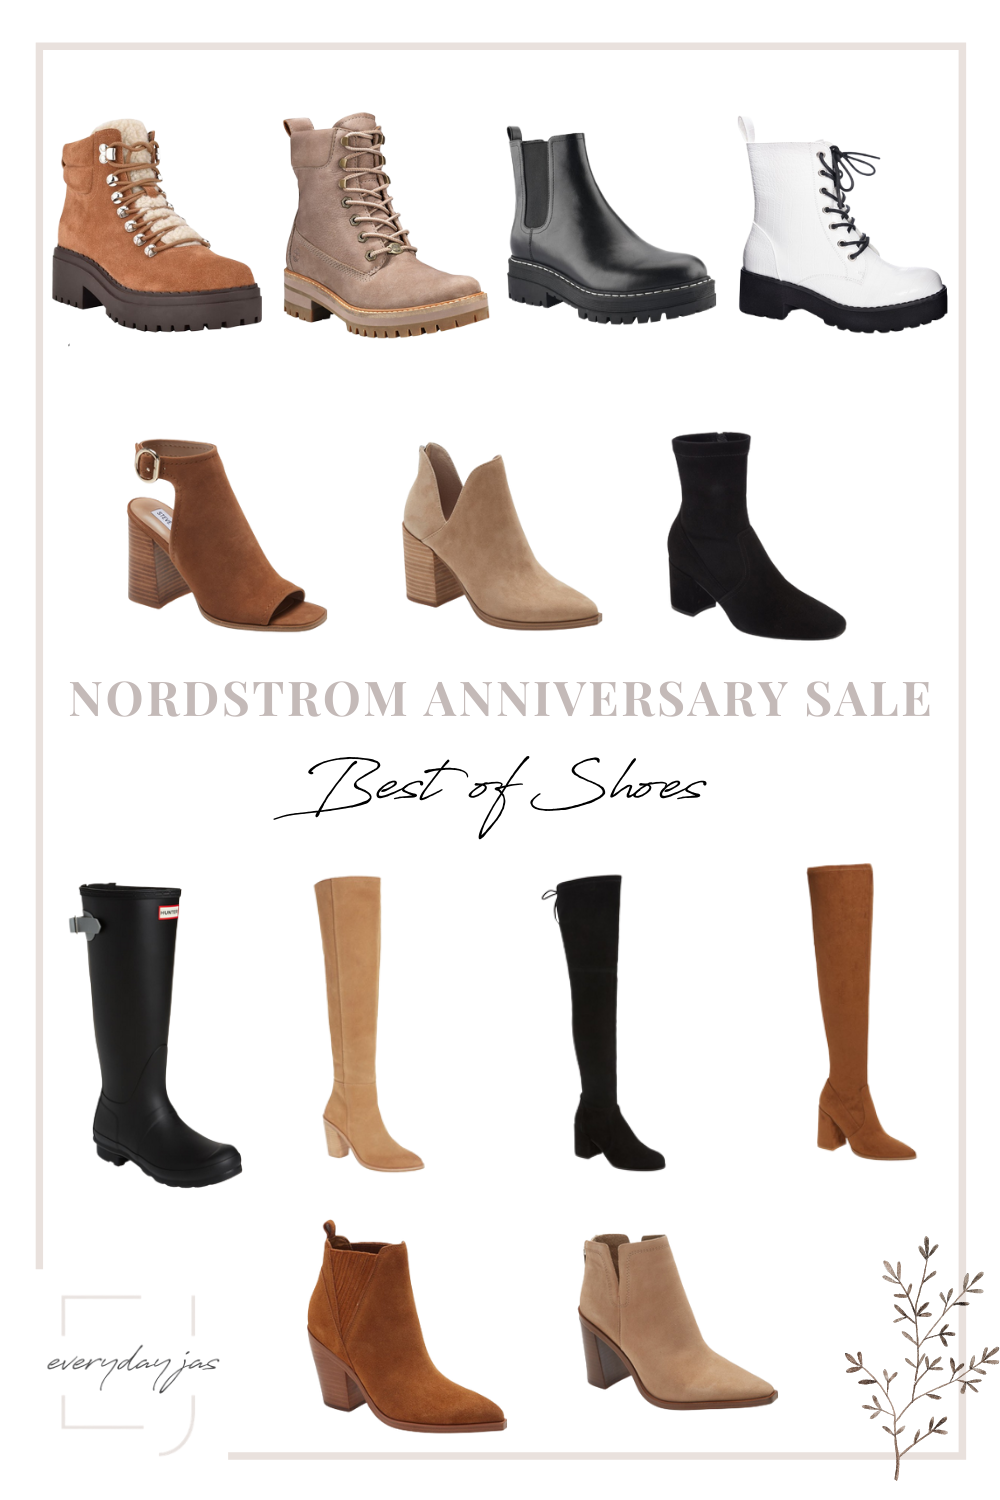 Women's Nordstrom Anniversary Sale best of shoes